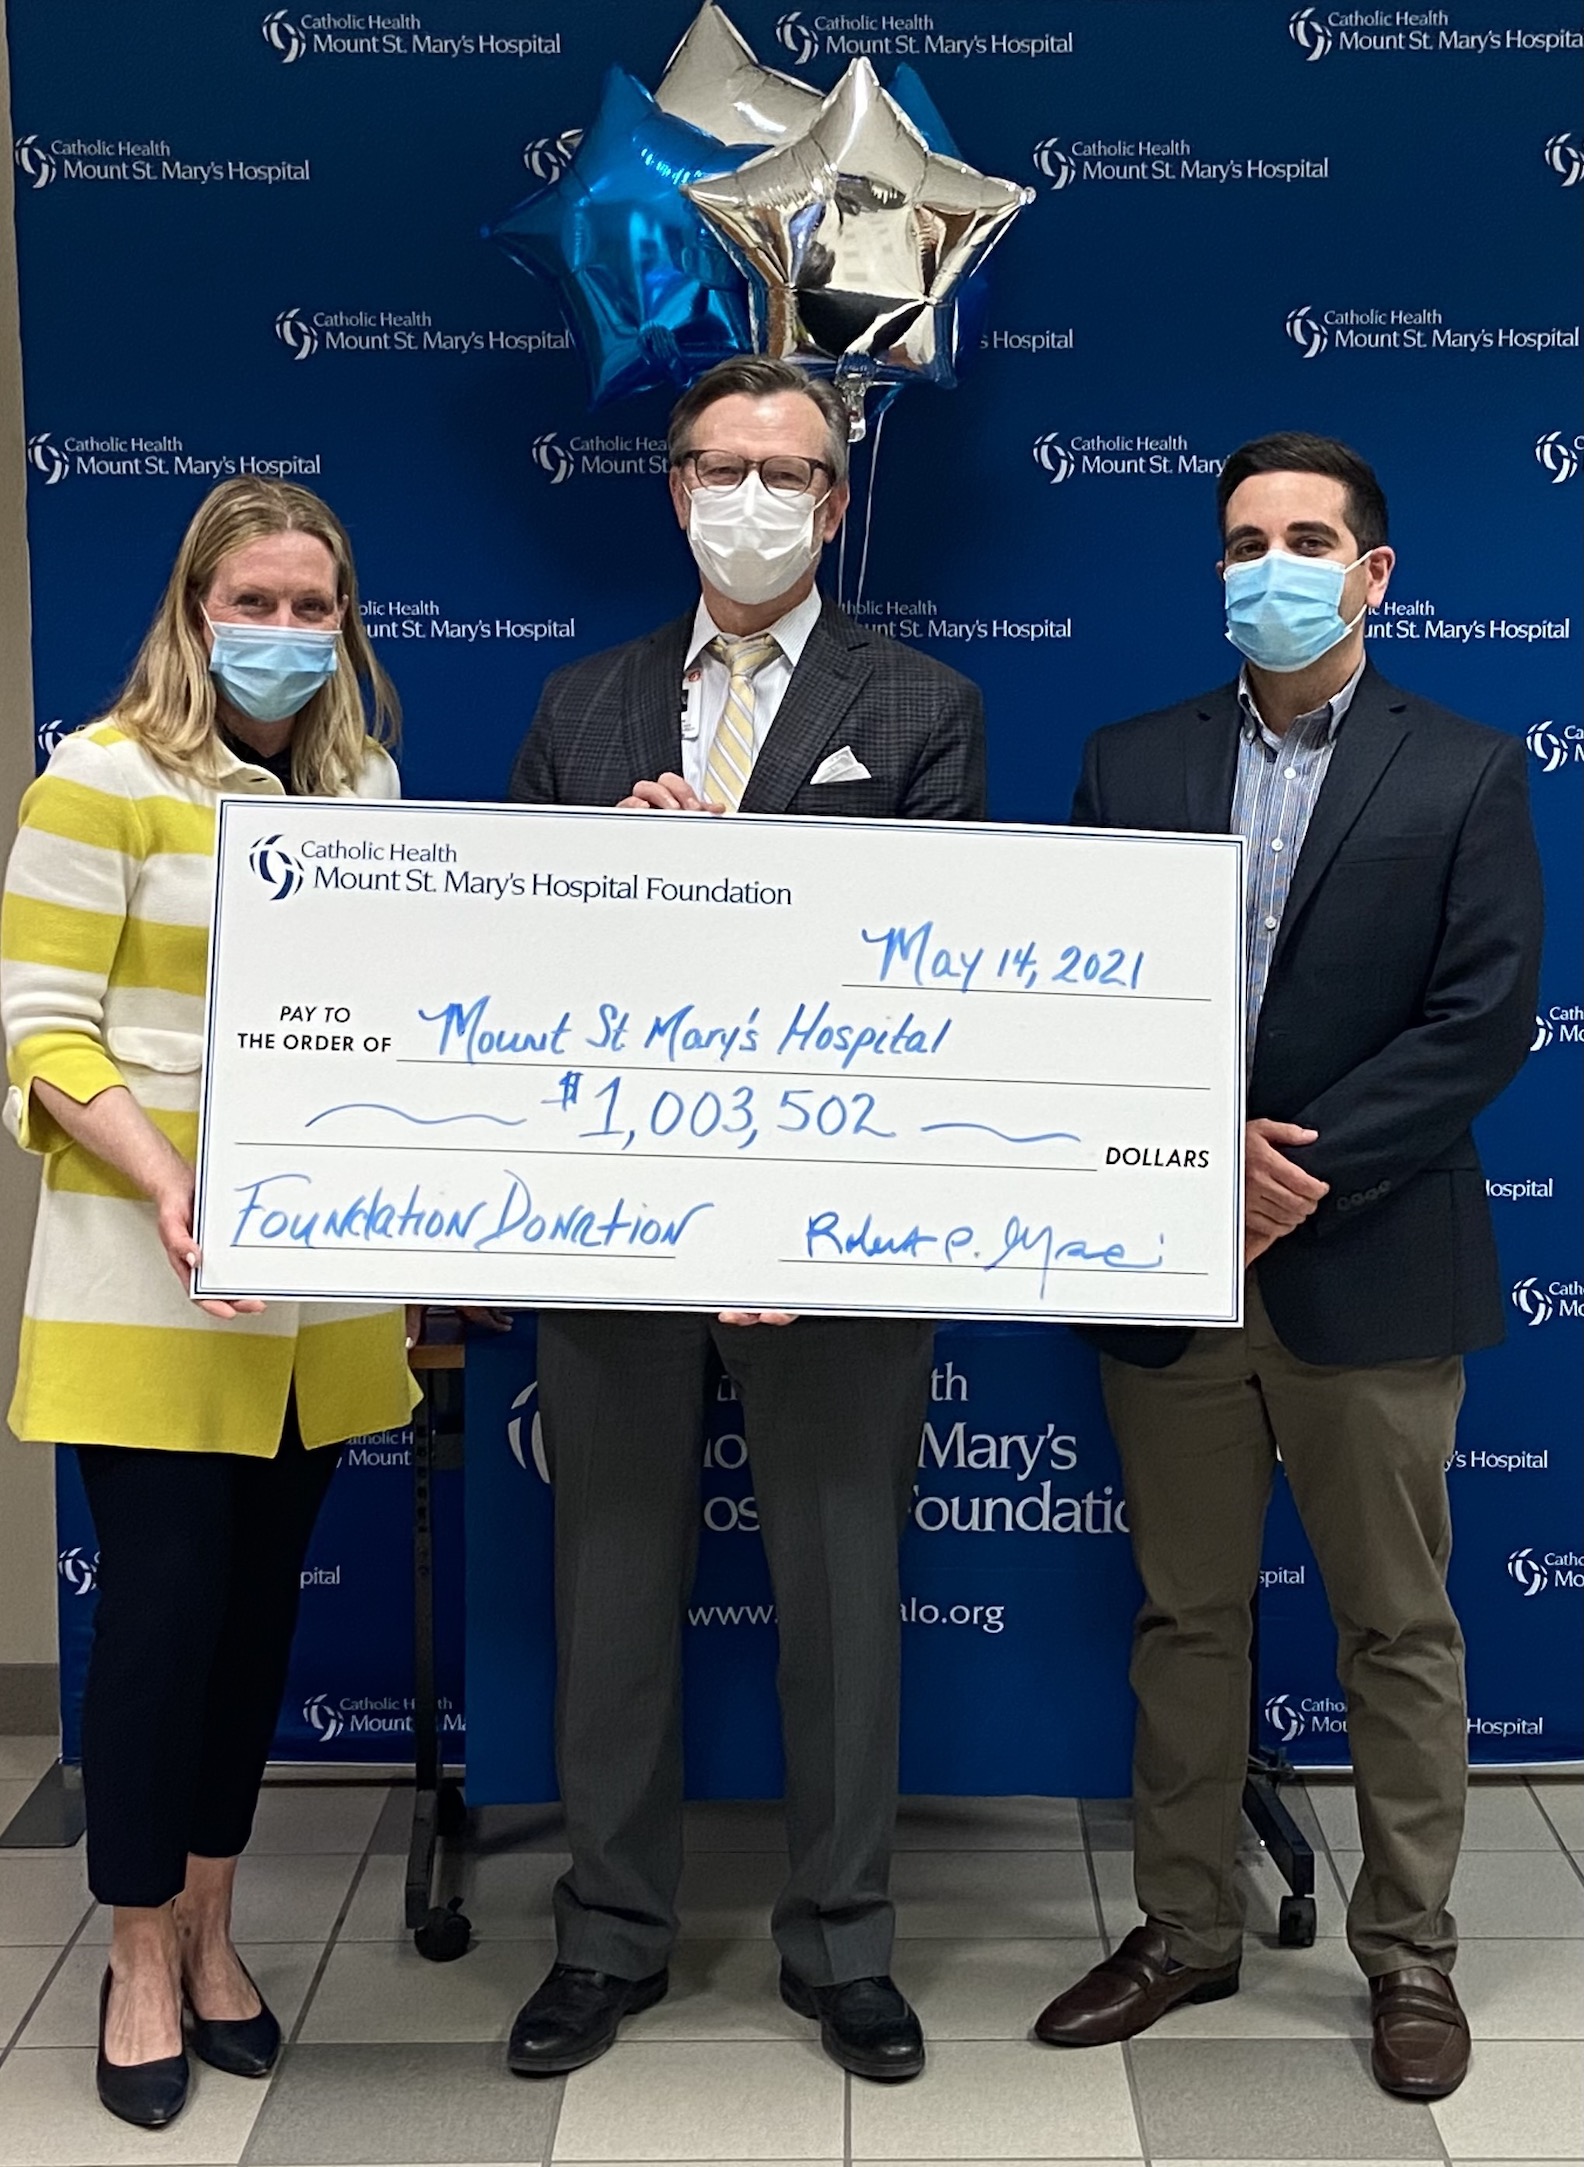 Pictured: Mount St. Mary's Hospital Foundation Executive Director Julie Berrigan, left, and Treasurer Robert Ingrasci, right, present a check to CJ Urlaub, hospital president.